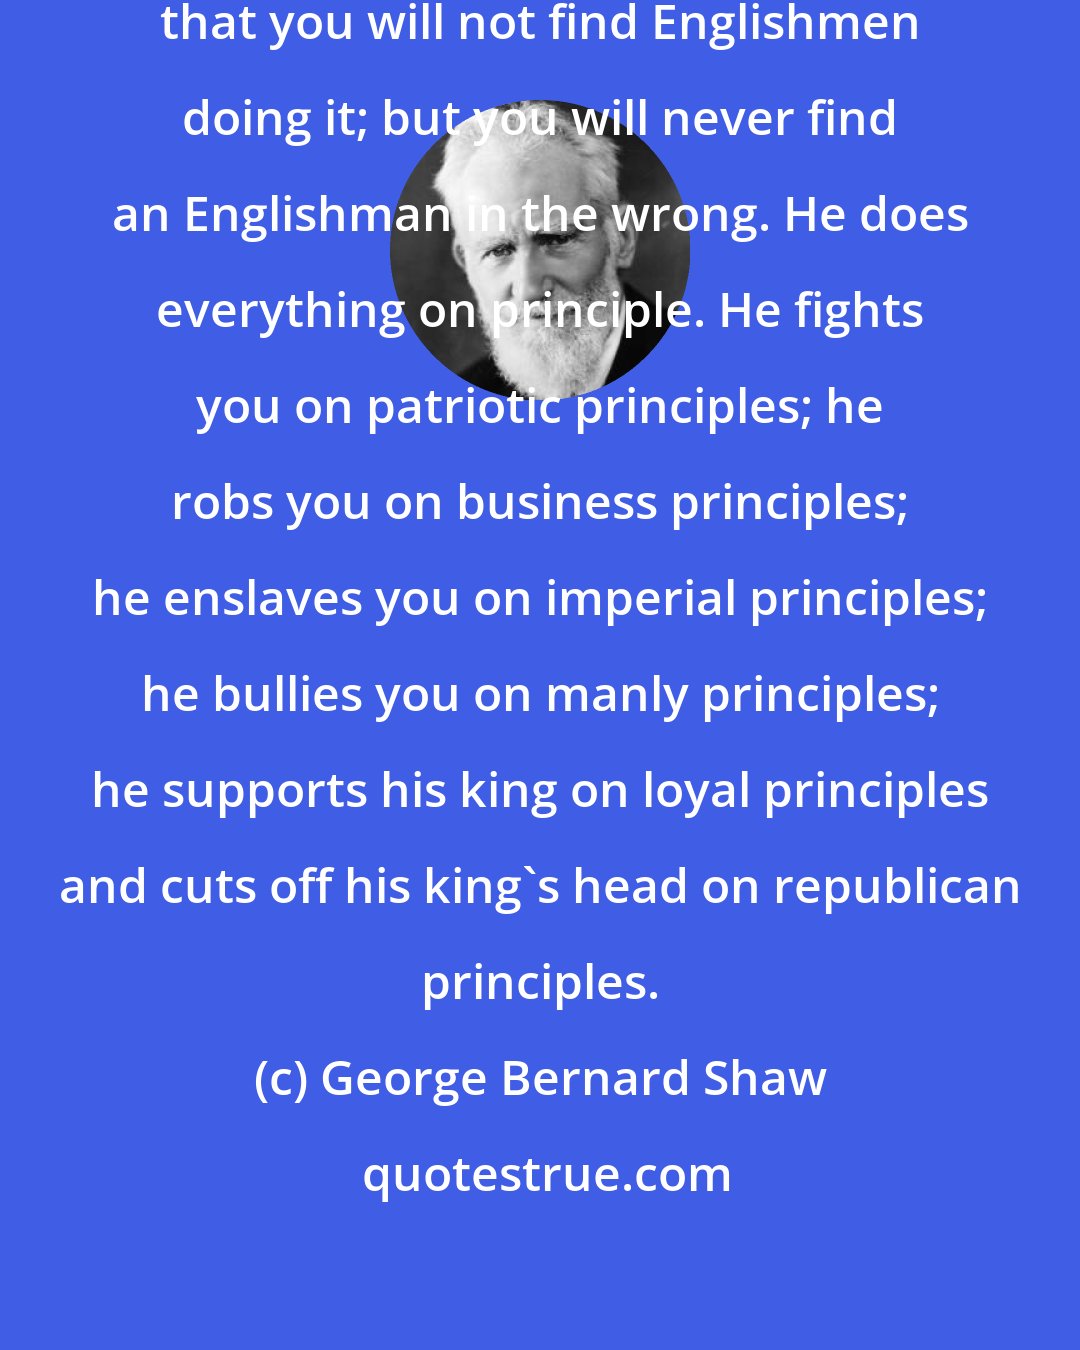 George Bernard Shaw: There is nothing so bad or so good that you will not find Englishmen doing it; but you will never find an Englishman in the wrong. He does everything on principle. He fights you on patriotic principles; he robs you on business principles; he enslaves you on imperial principles; he bullies you on manly principles; he supports his king on loyal principles and cuts off his king's head on republican principles.